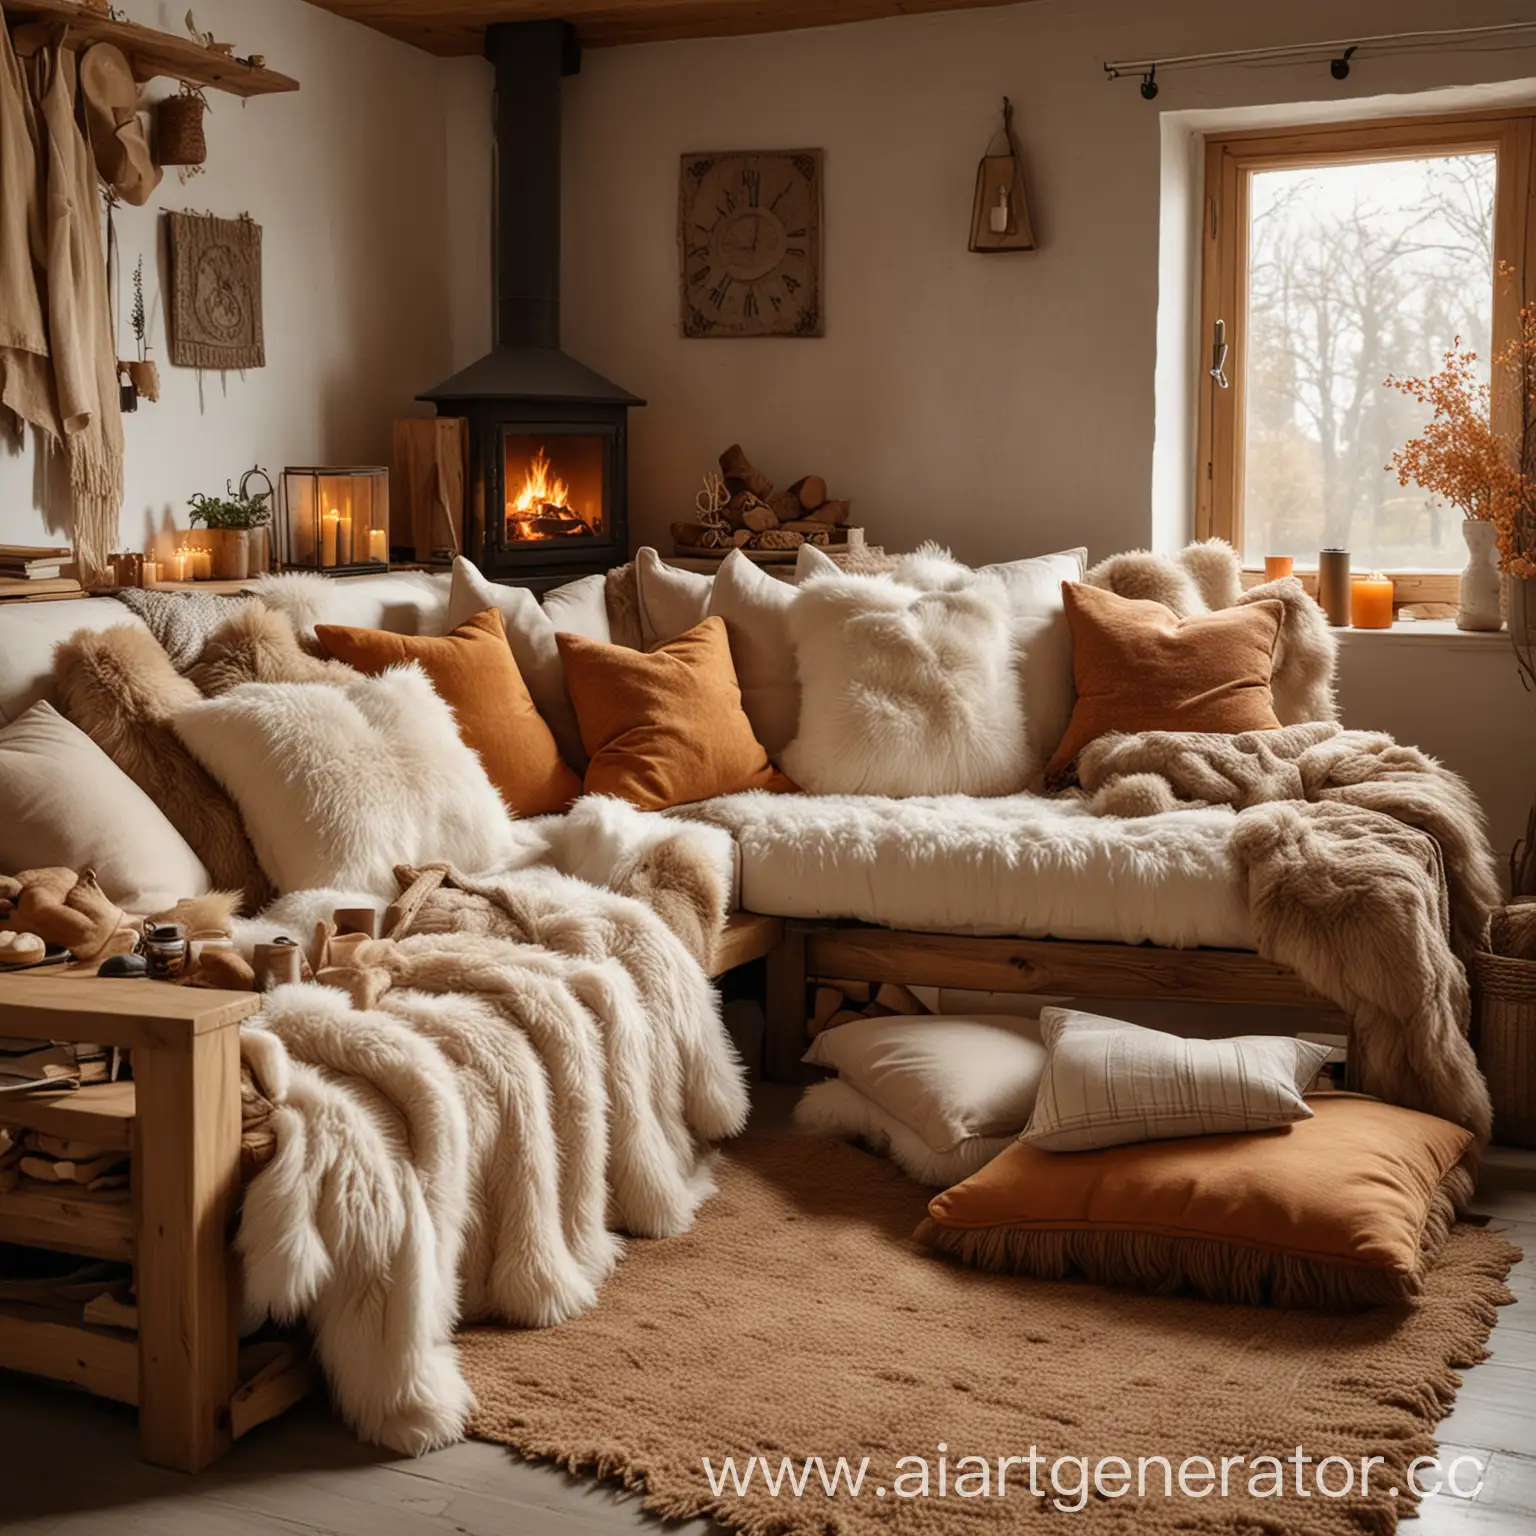 Cozy-Rustic-Living-Room-with-Wooden-Sofa-and-Fireplace